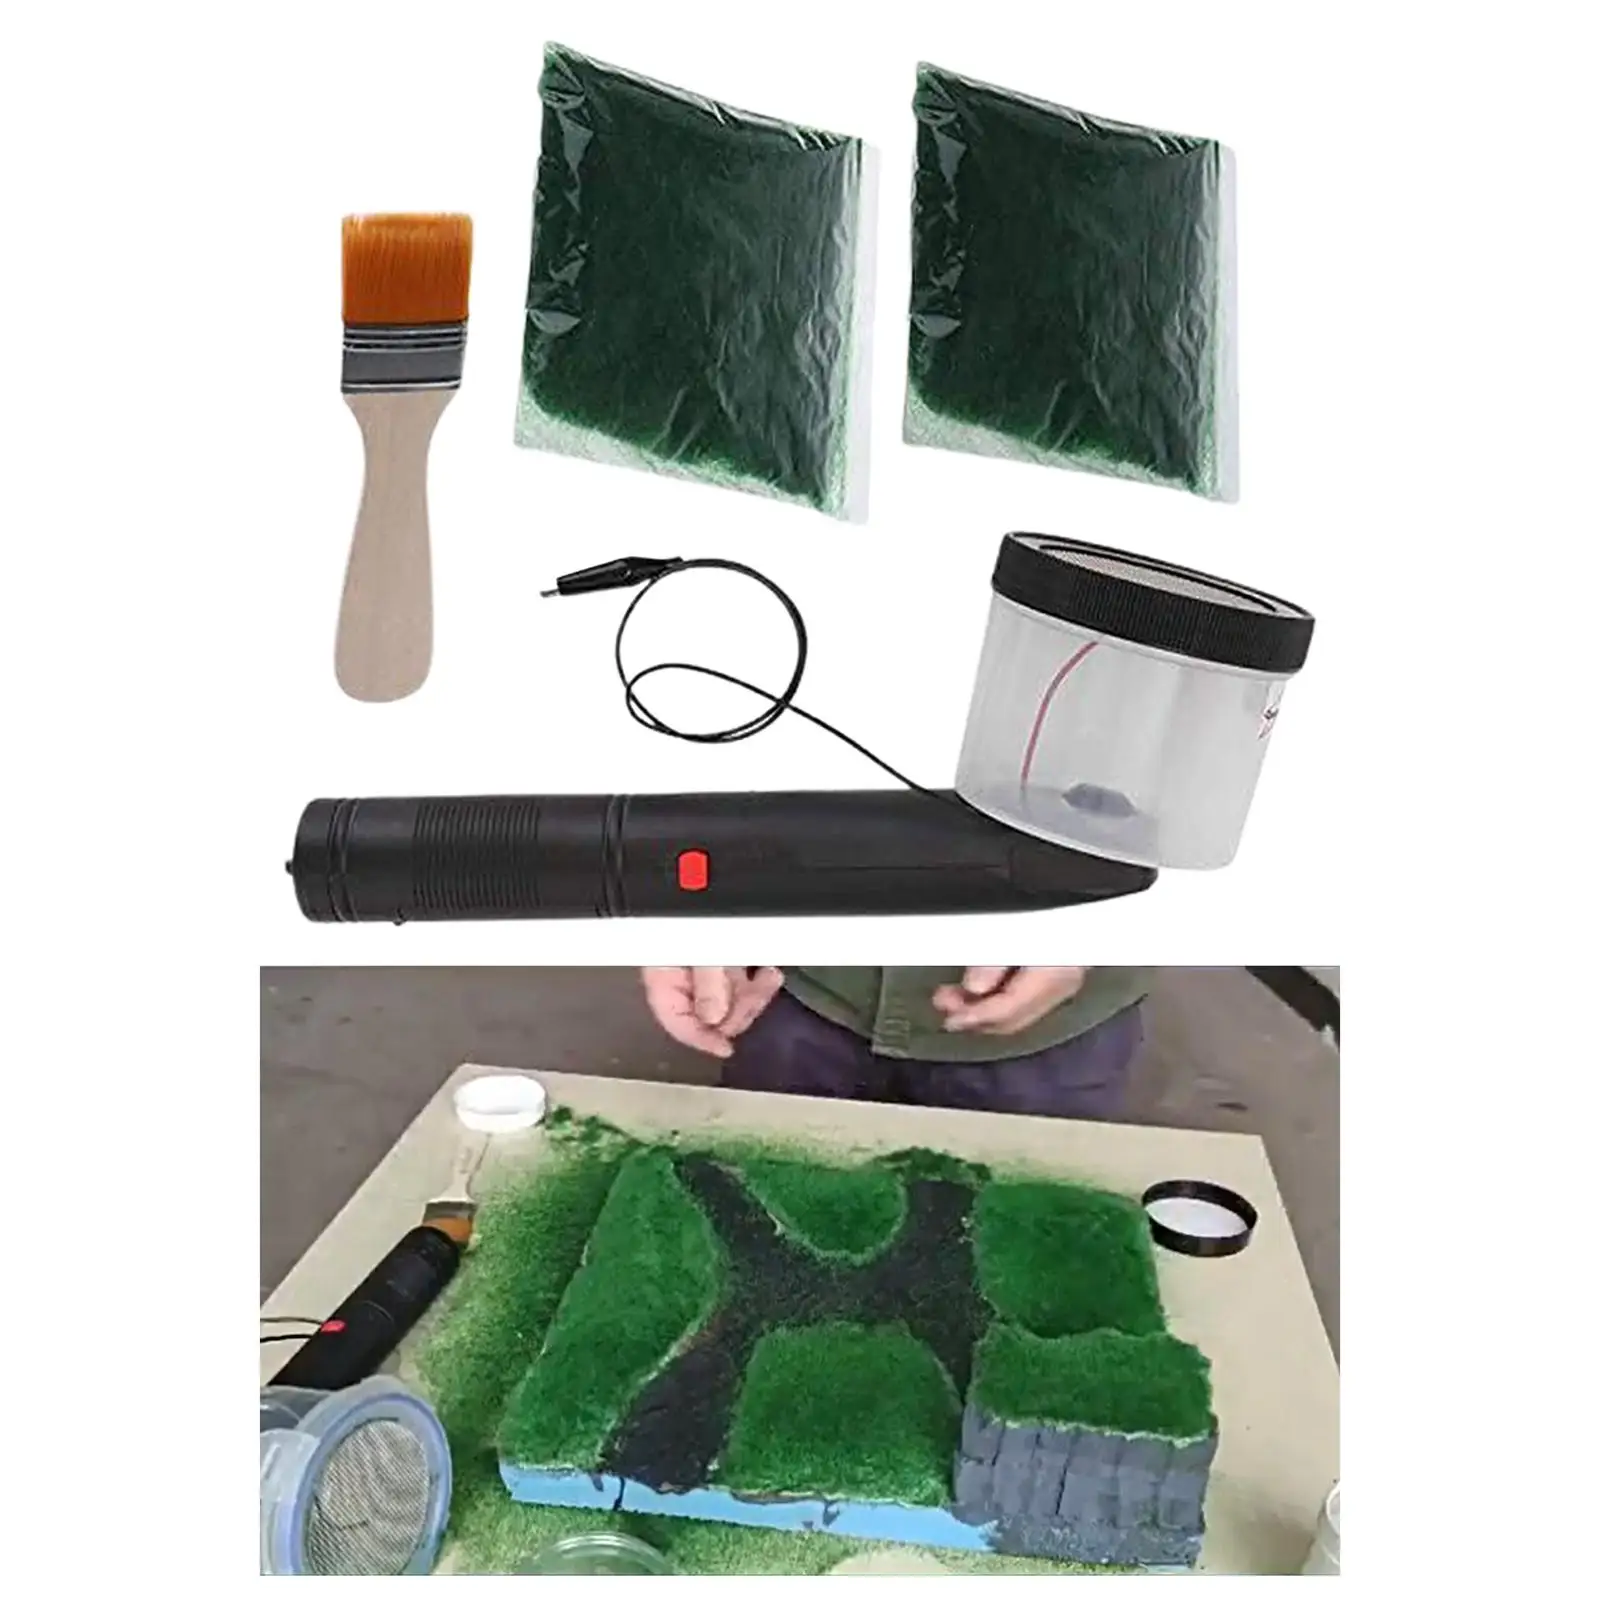 Static Grass Applicator Hobby Accessories for Street Building DIY Project